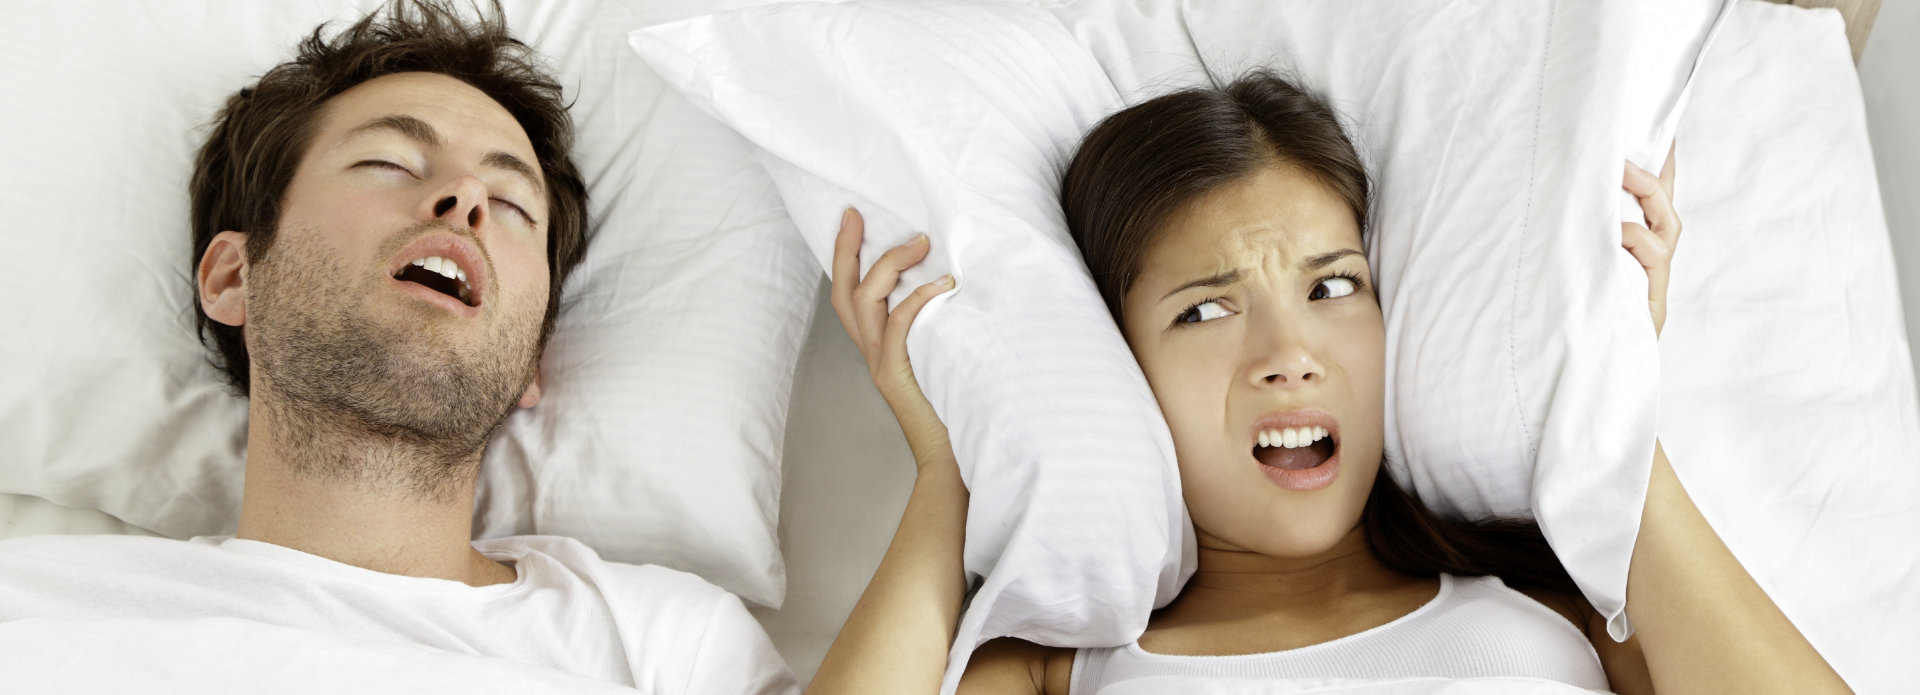 annoyed young woman who cannot sleep due to her partner's snoring